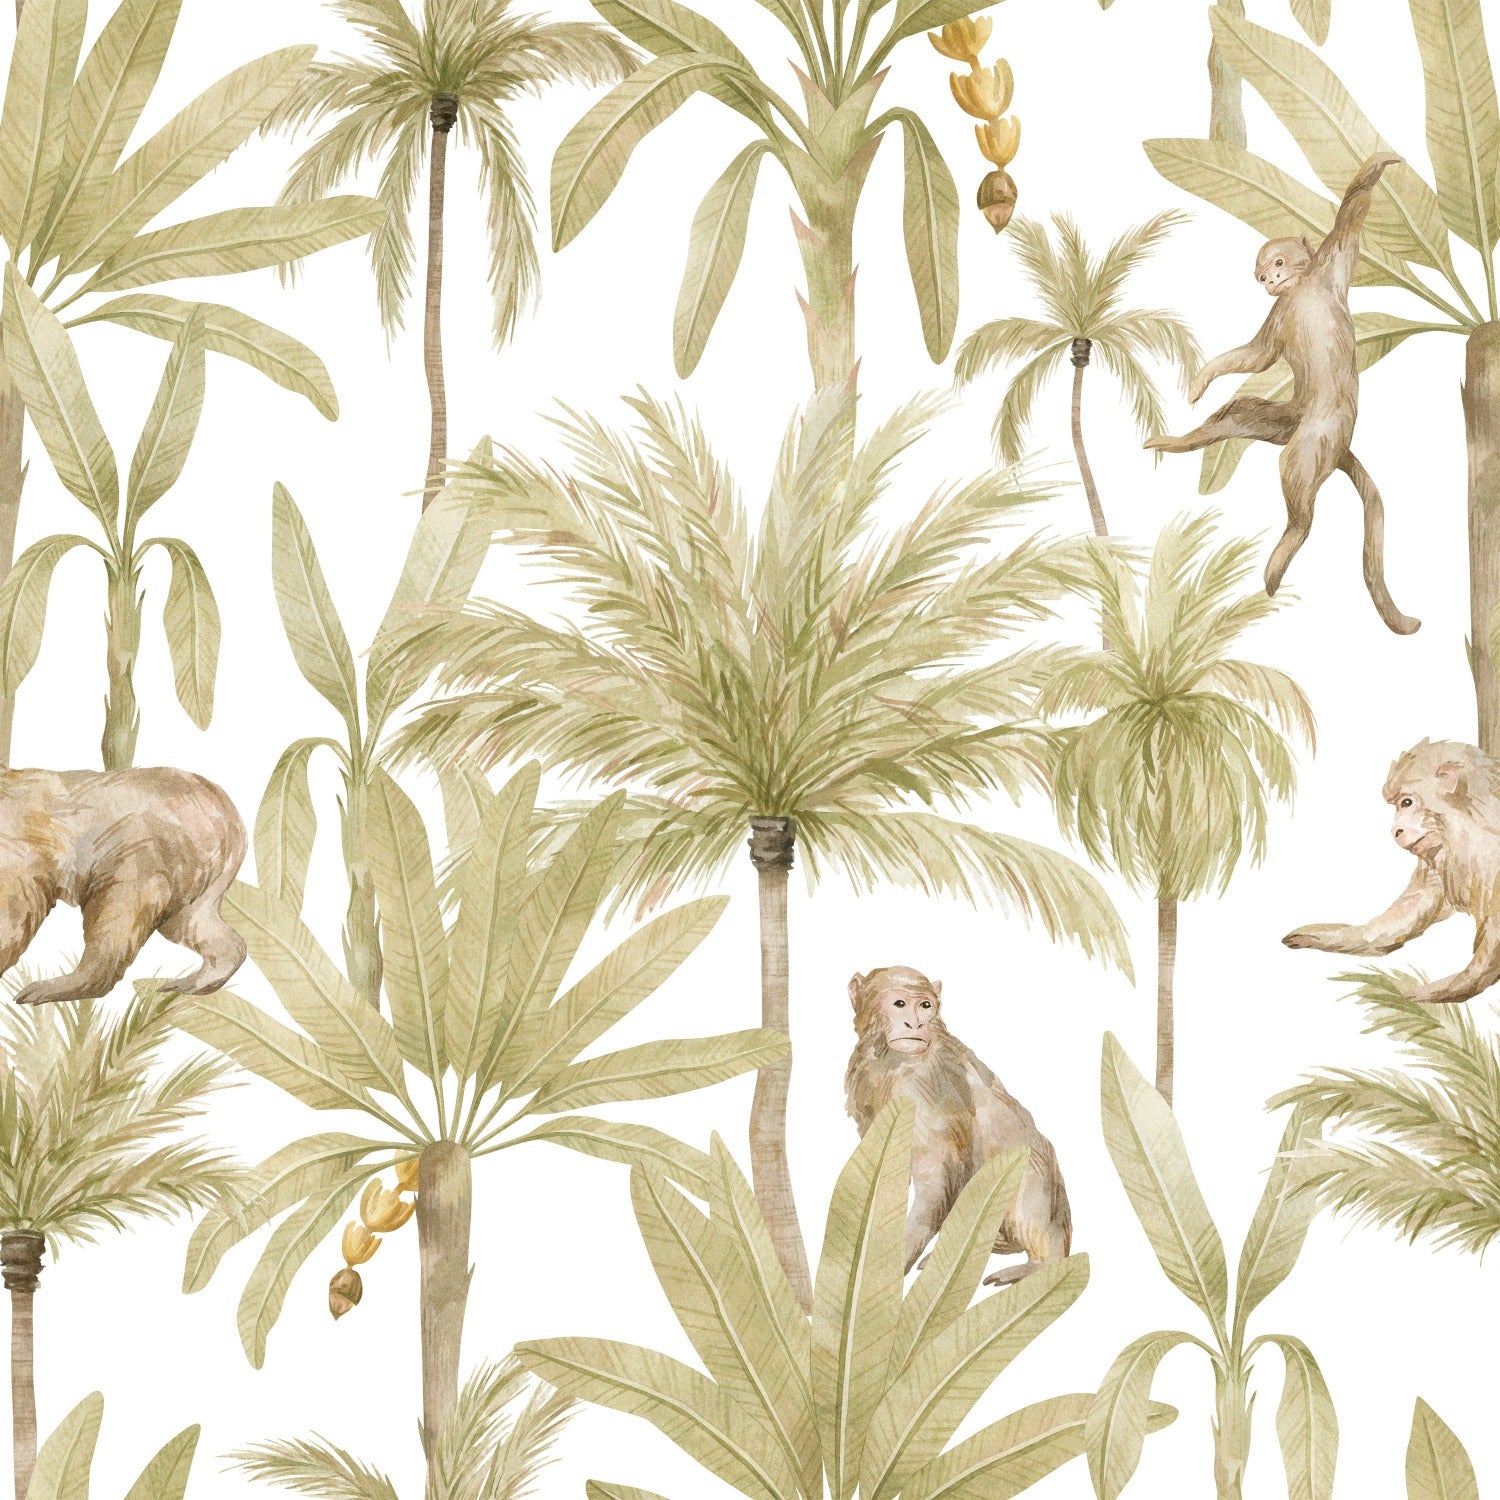 Close-up view of the Magic Morocco Jungle Wallpaper featuring detailed illustrations of various jungle elements, including palm trees, monkeys, and elephants, set in soft green and beige tones to create a lively jungle scene.